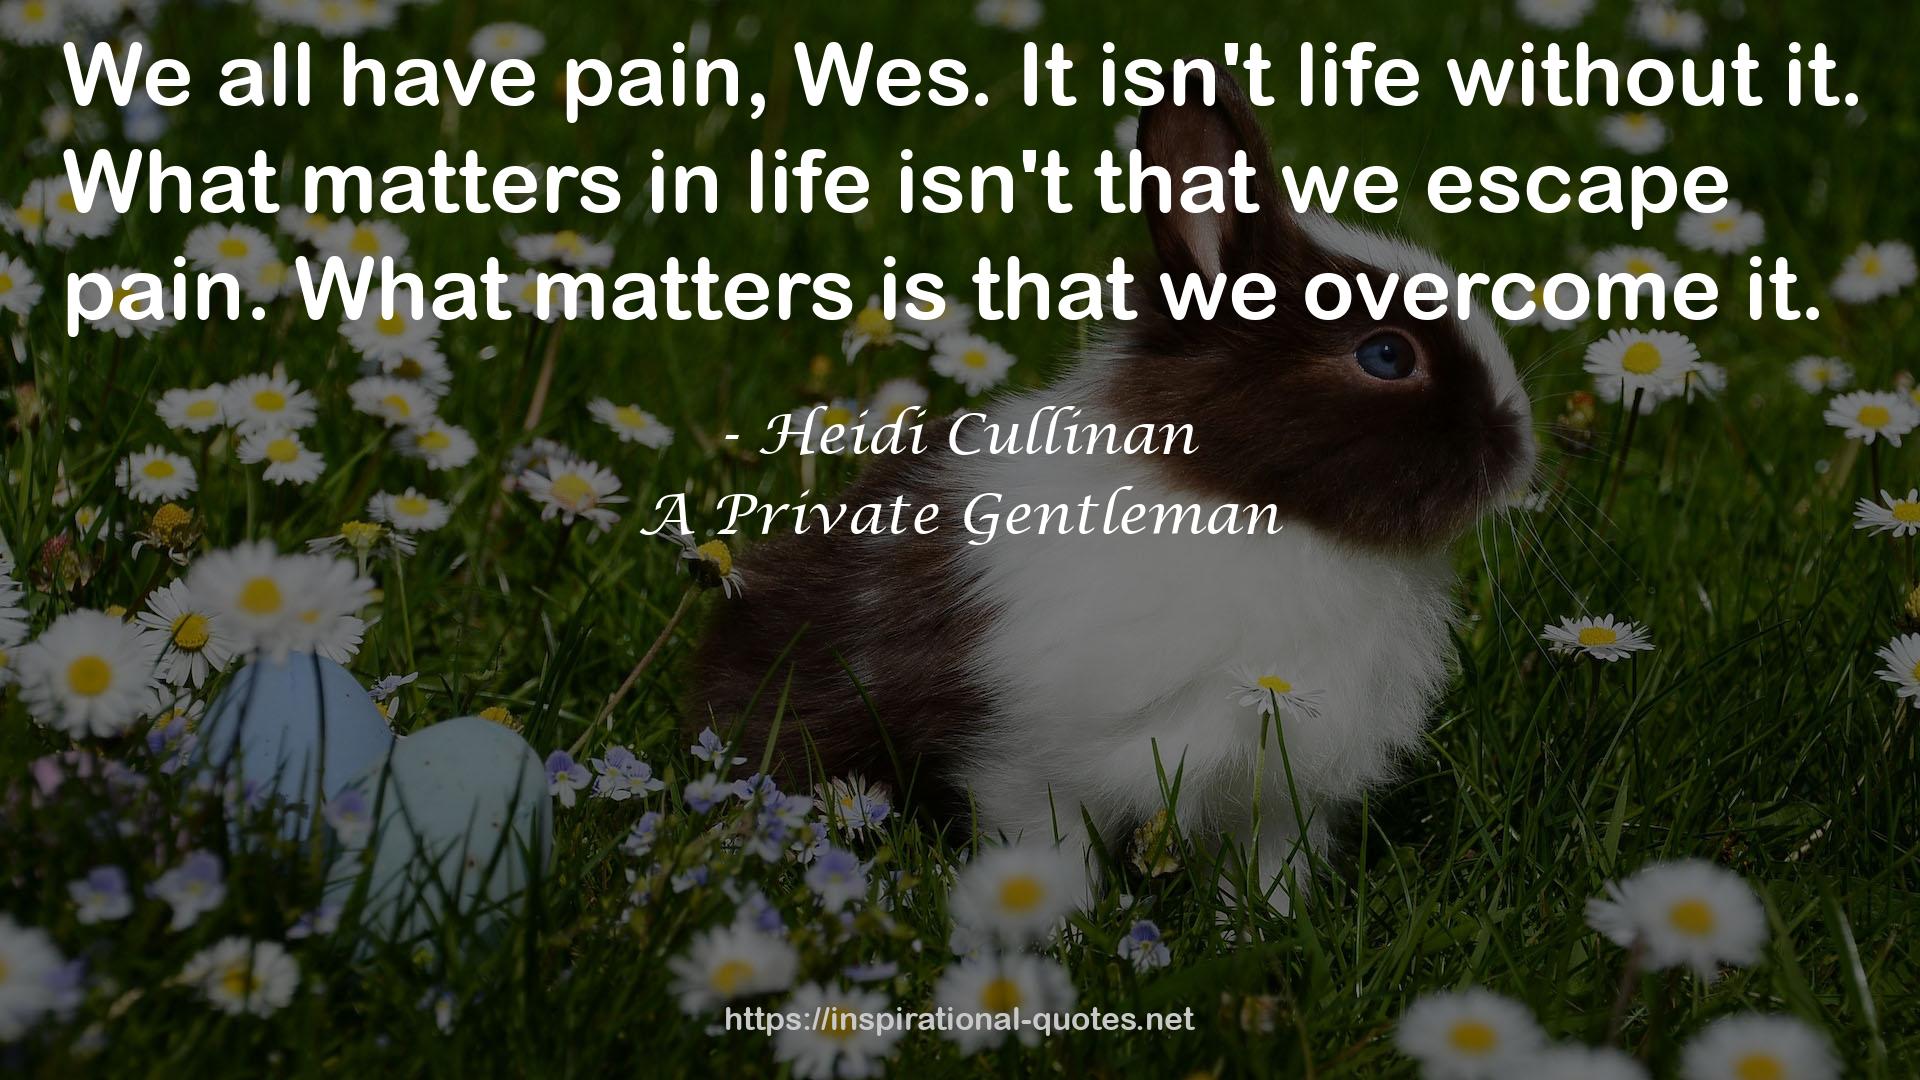 A Private Gentleman QUOTES